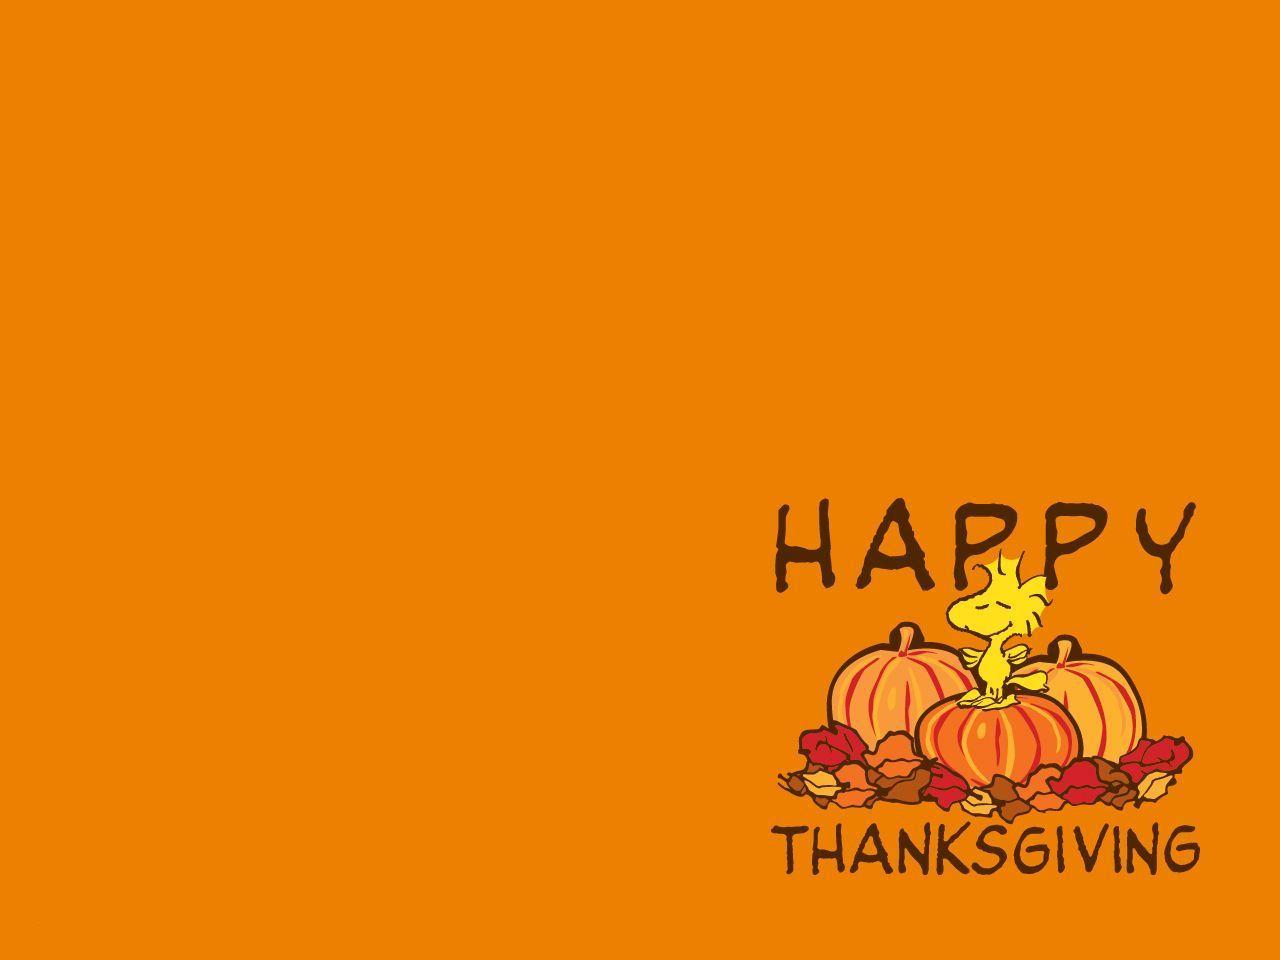 Happy Thanksgiving Day 2014 Wishes Wallpaper Image Quotes